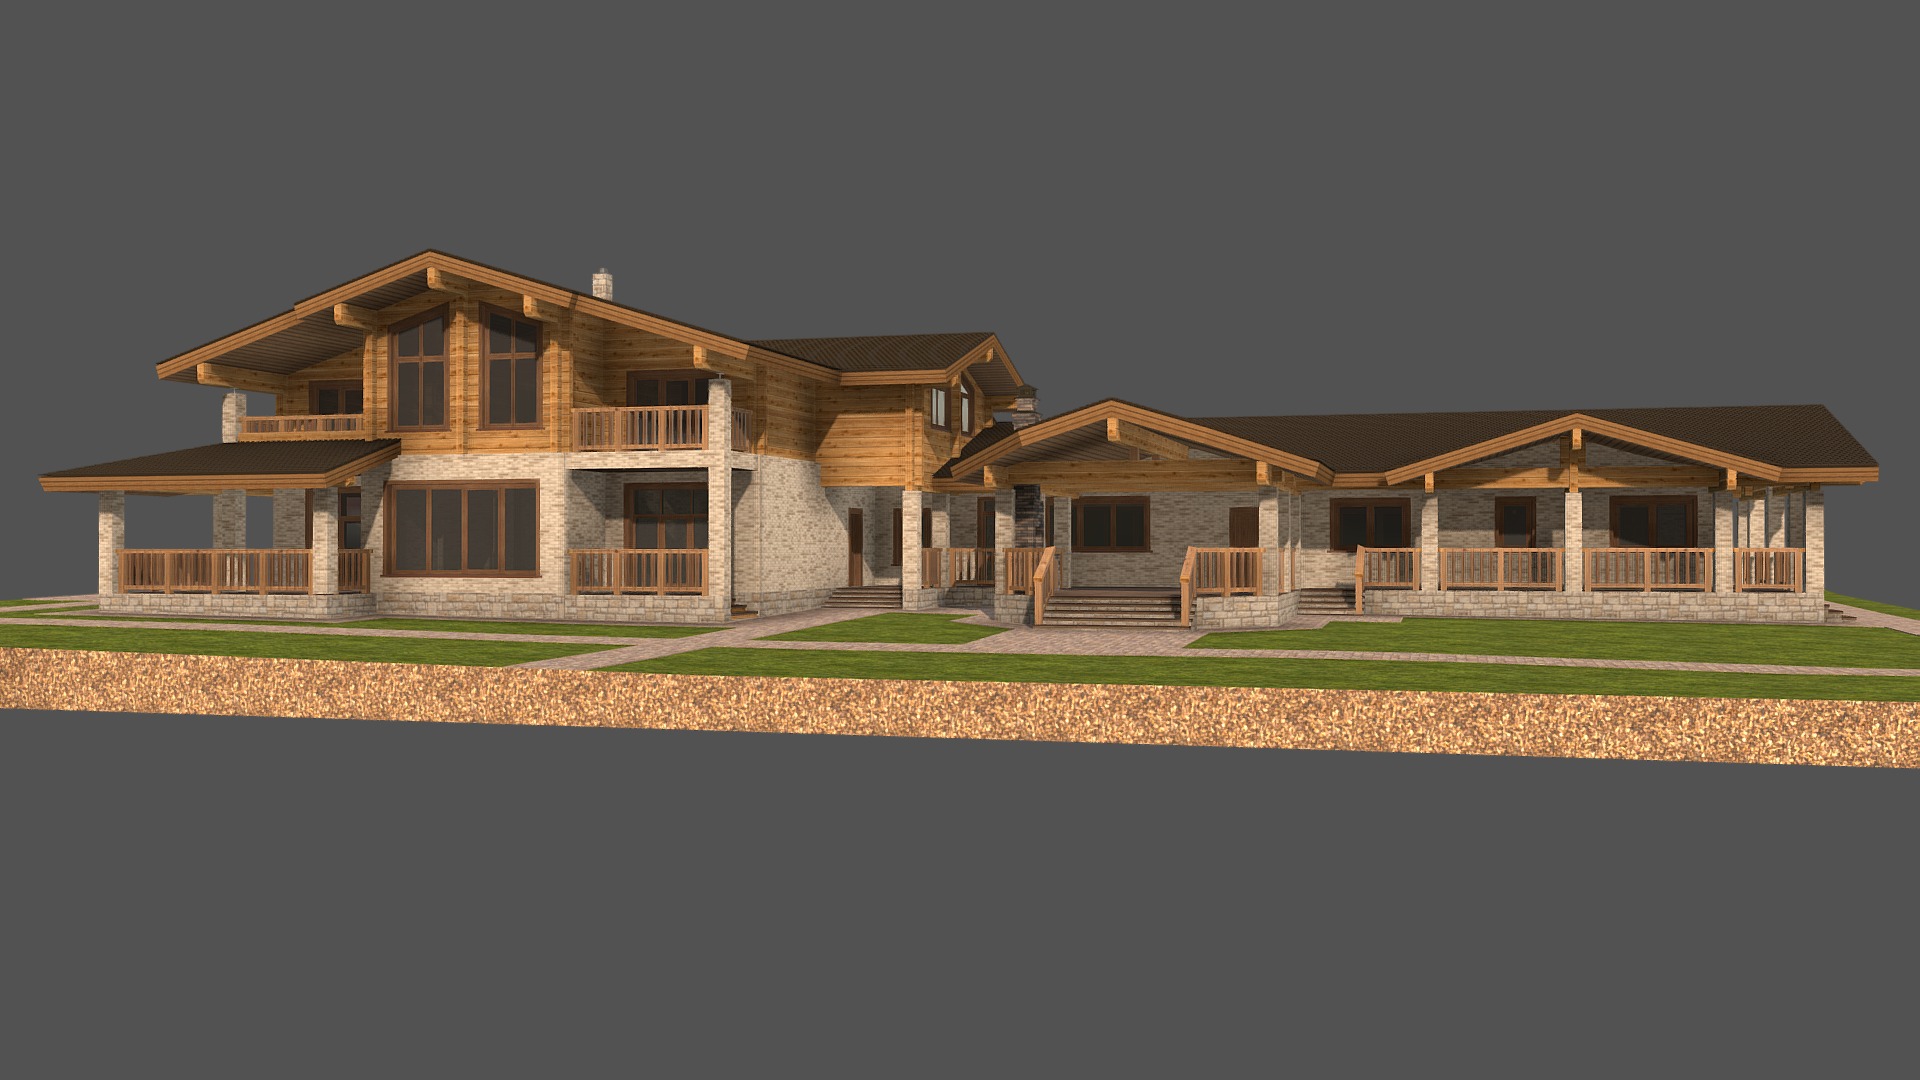 3D model Жилой комплекс - This is a 3D model of the Жилой комплекс. The 3D model is about a house with a lawn and a fence around it.